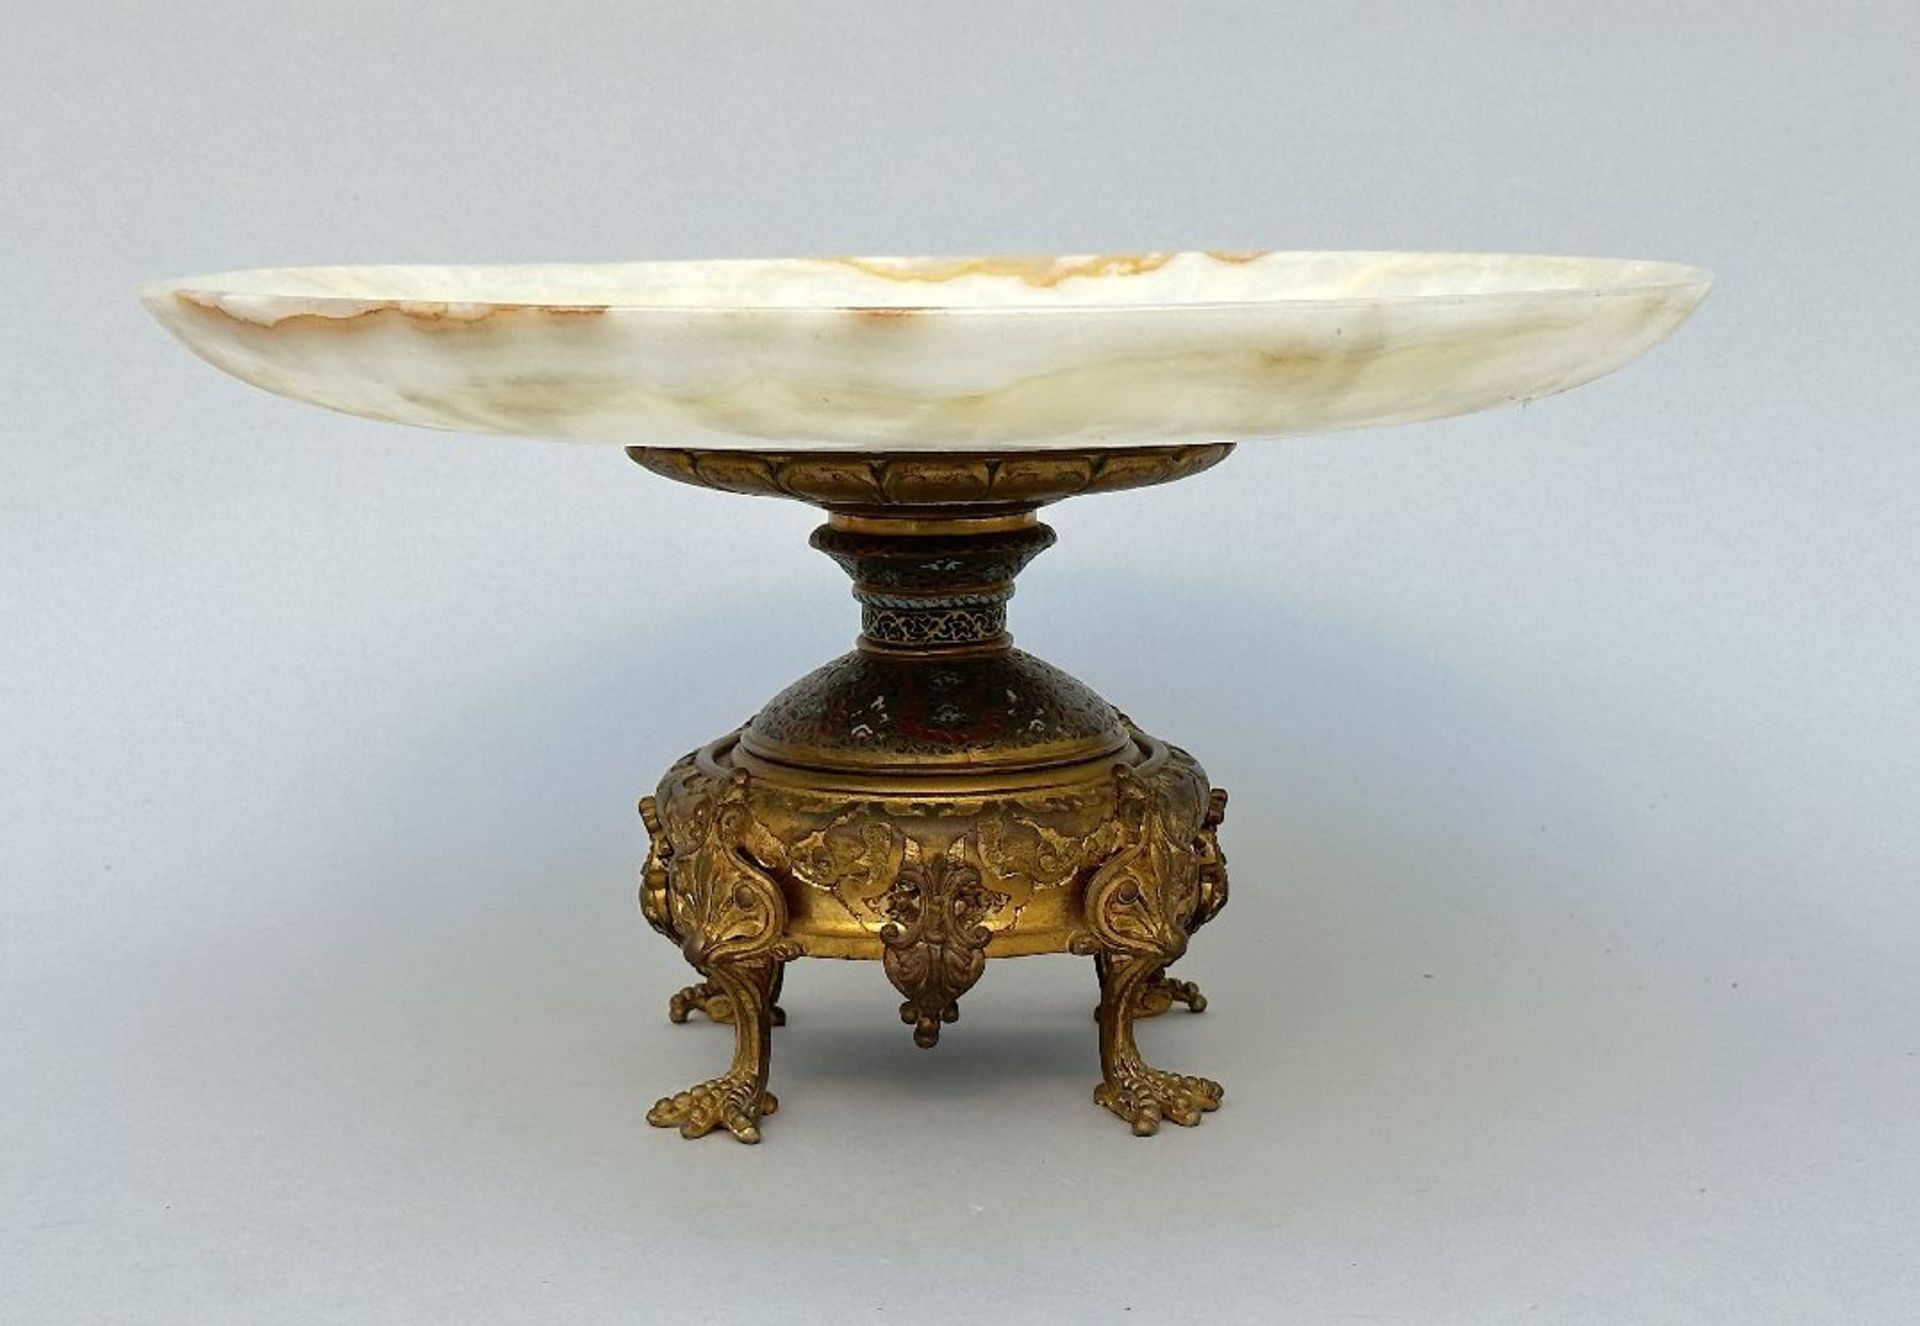 A decorative coupe in gilt bronze, onyx and champlevé